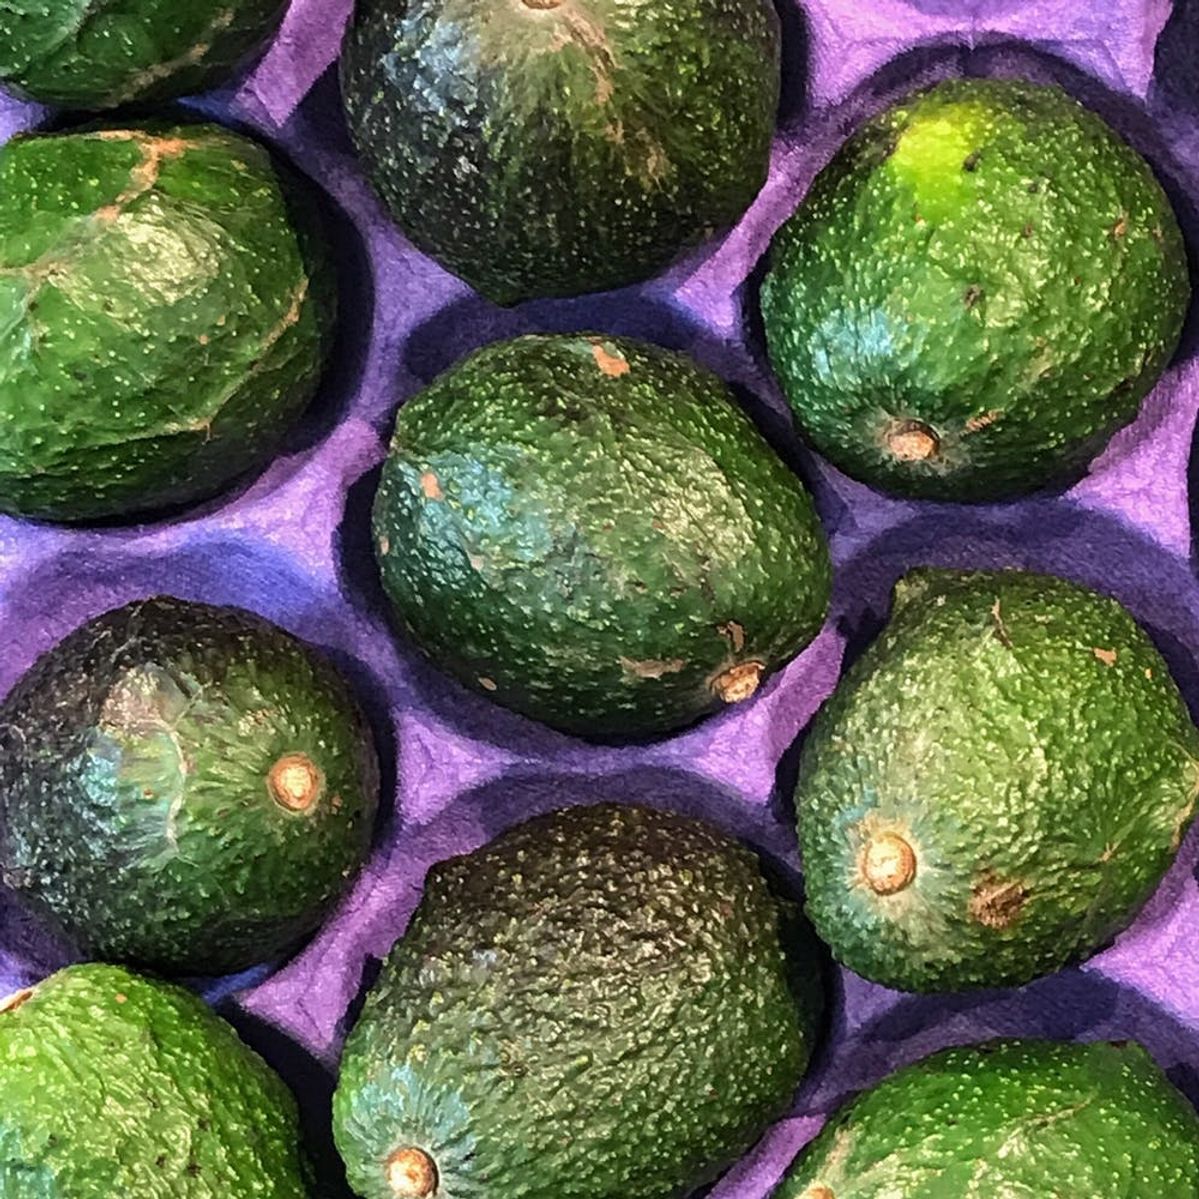 Seedless Avocados Are Trending So You Can Say Buh-Bye to Avocado Hand